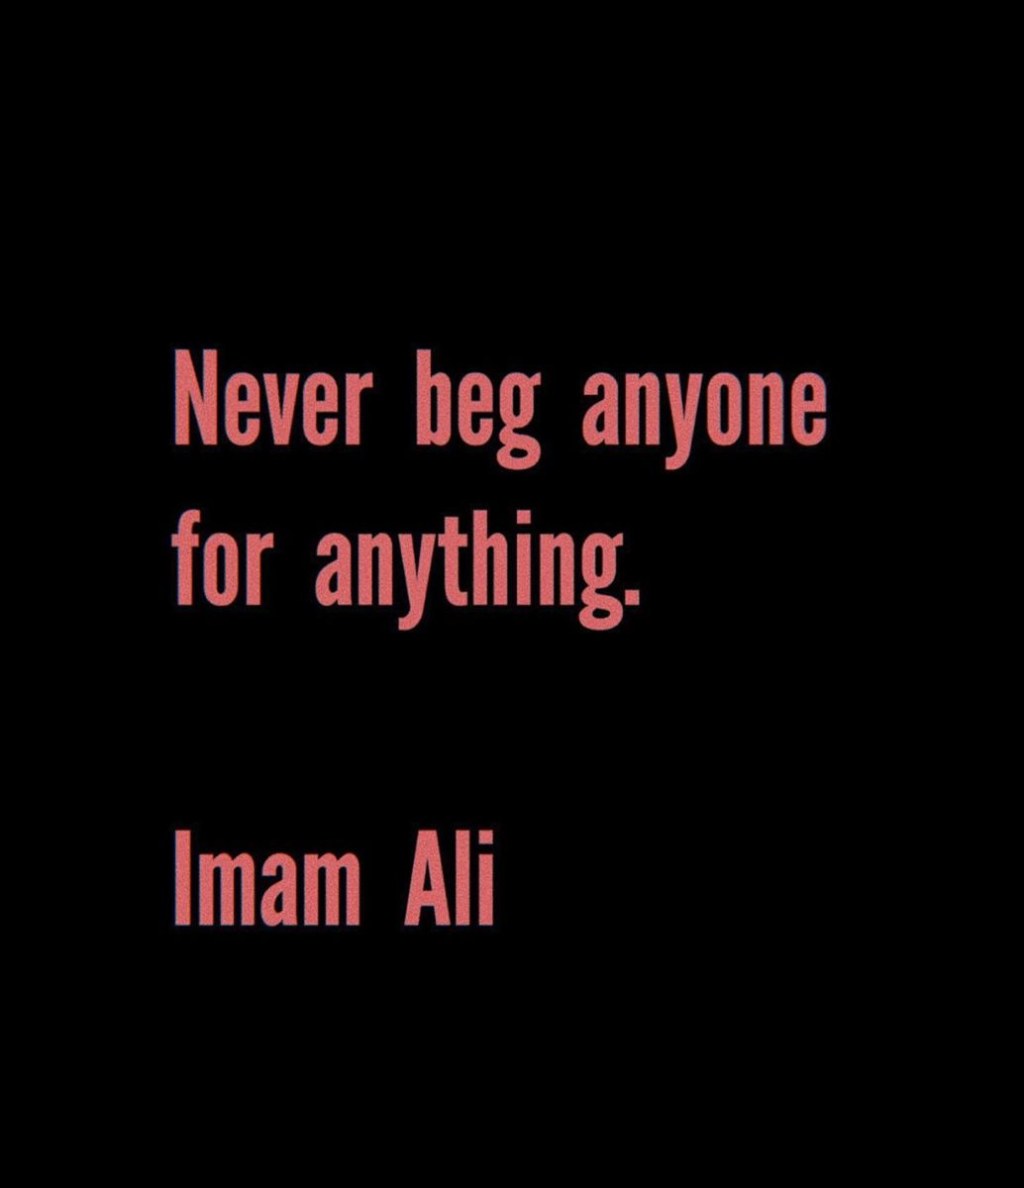 Picture of: Never beg anyone for anything Hazrat ali  Life lesson quotes